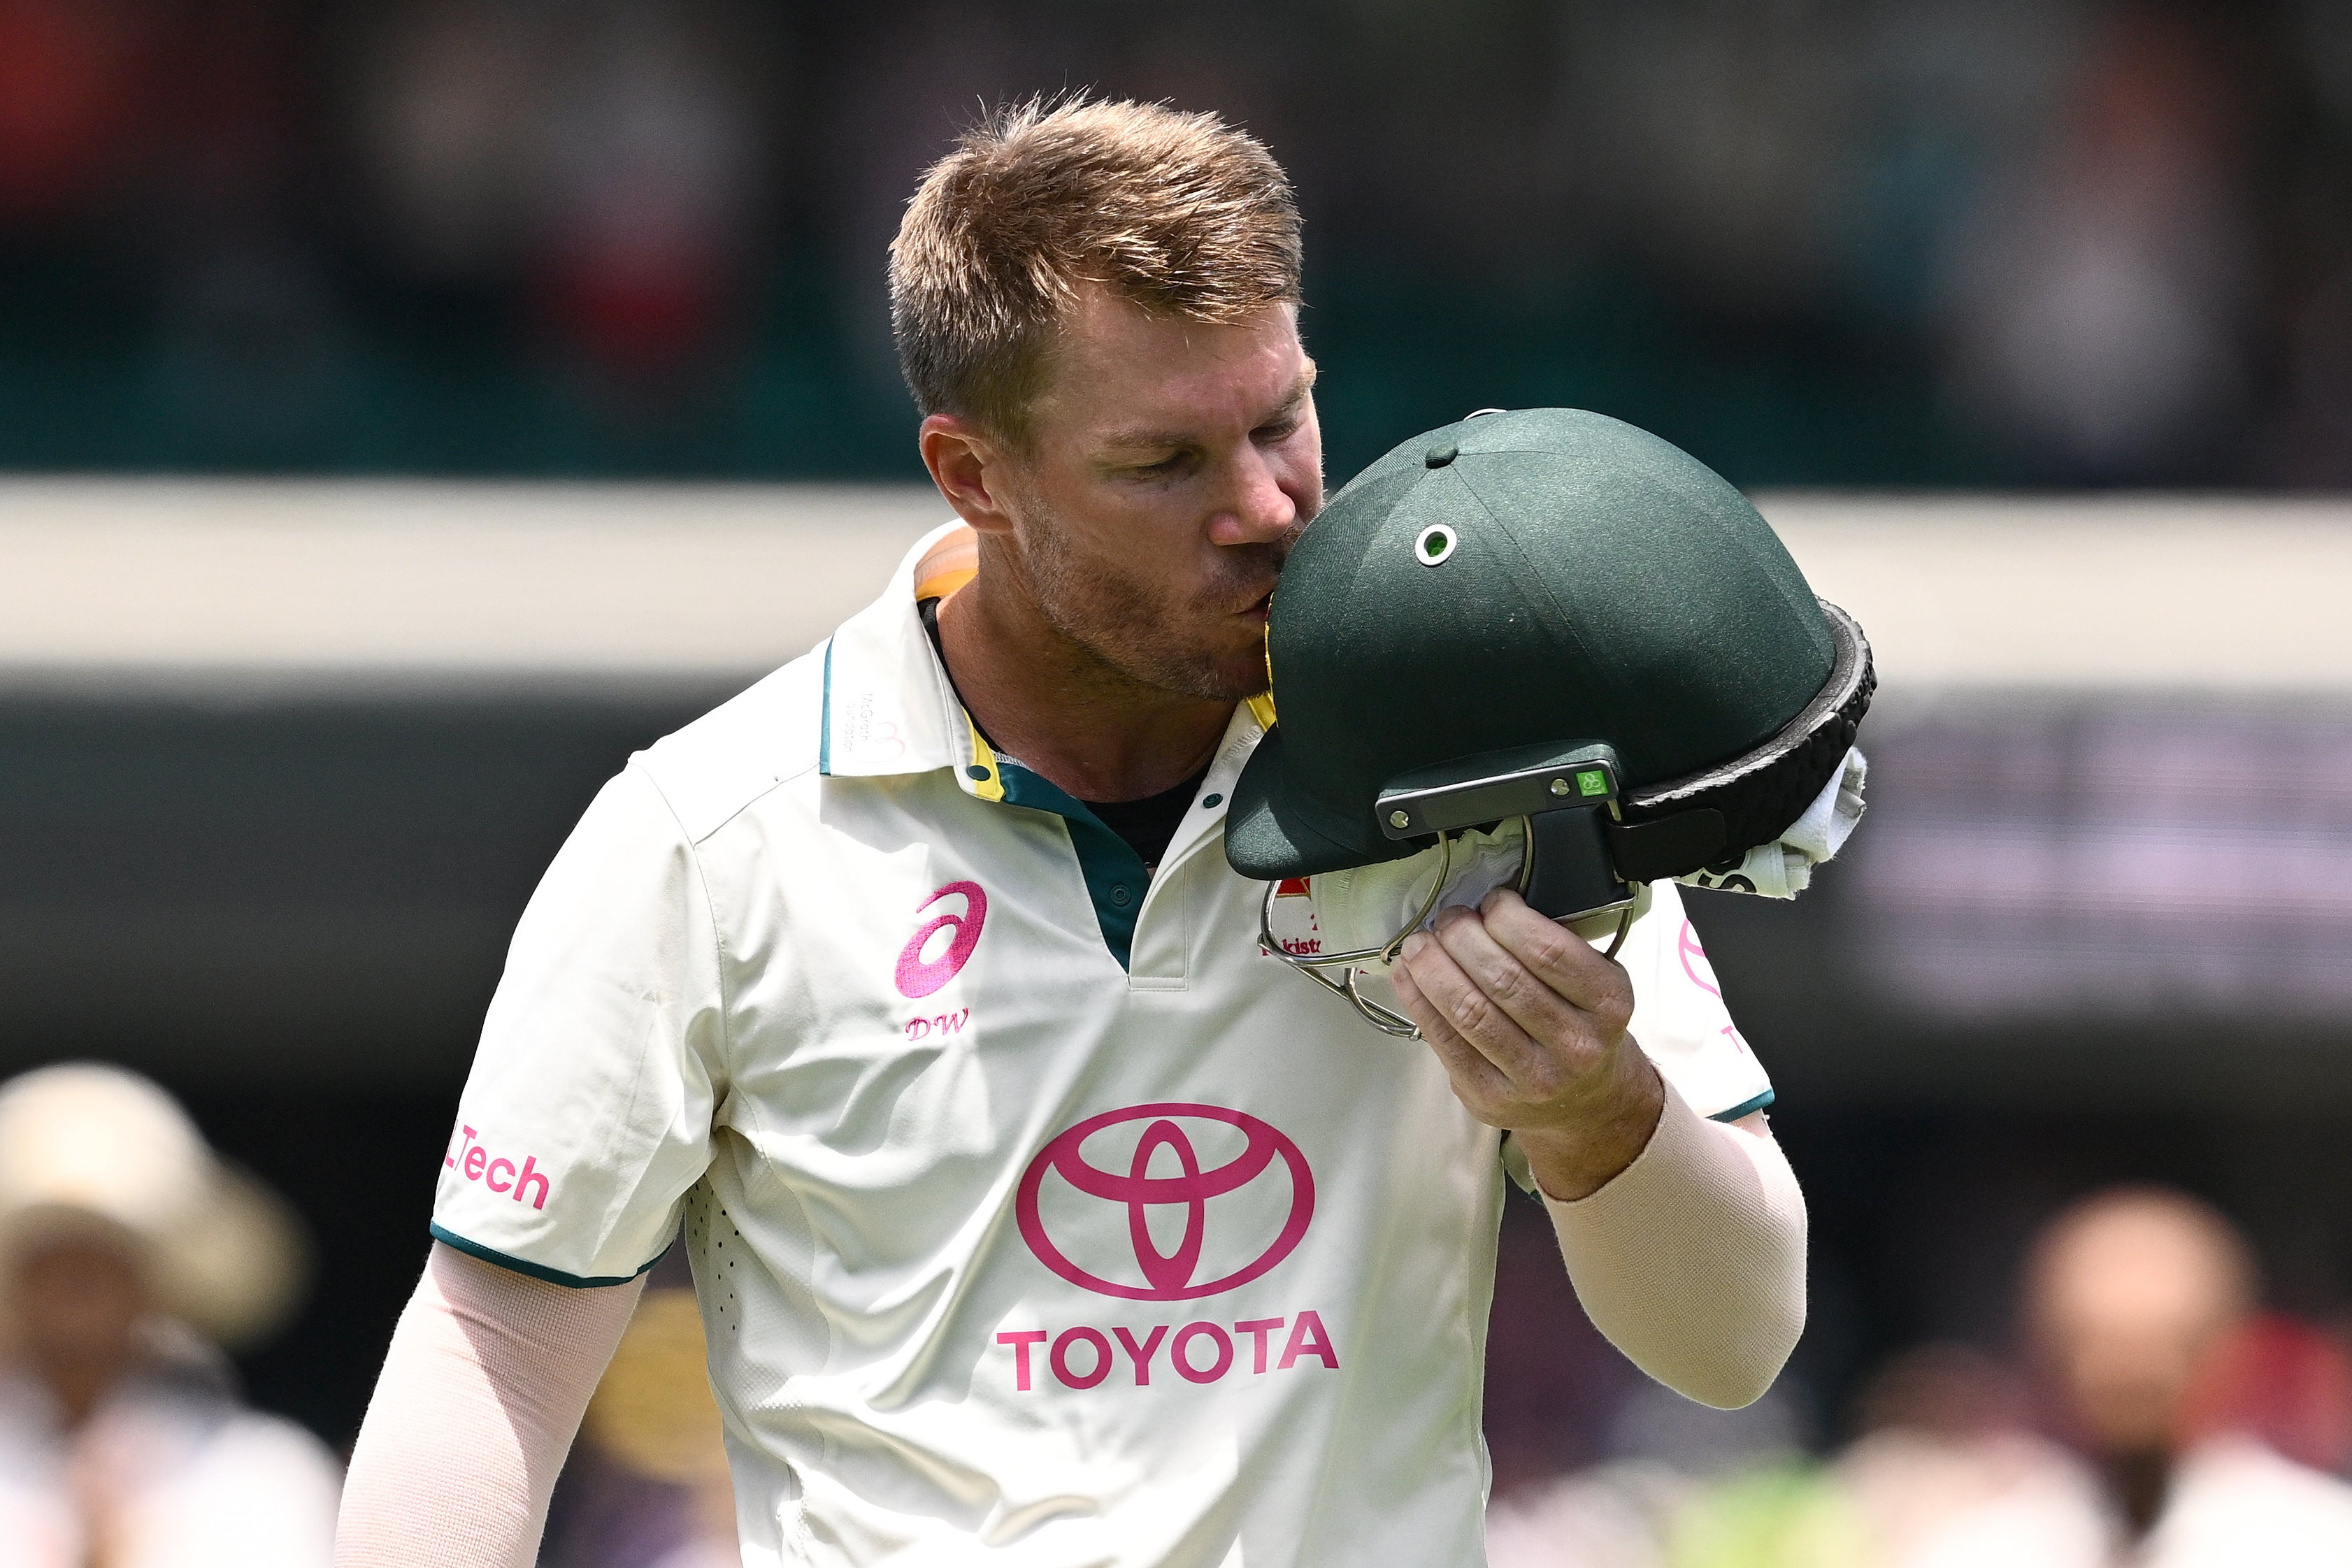 David Warner finished his Test career in style